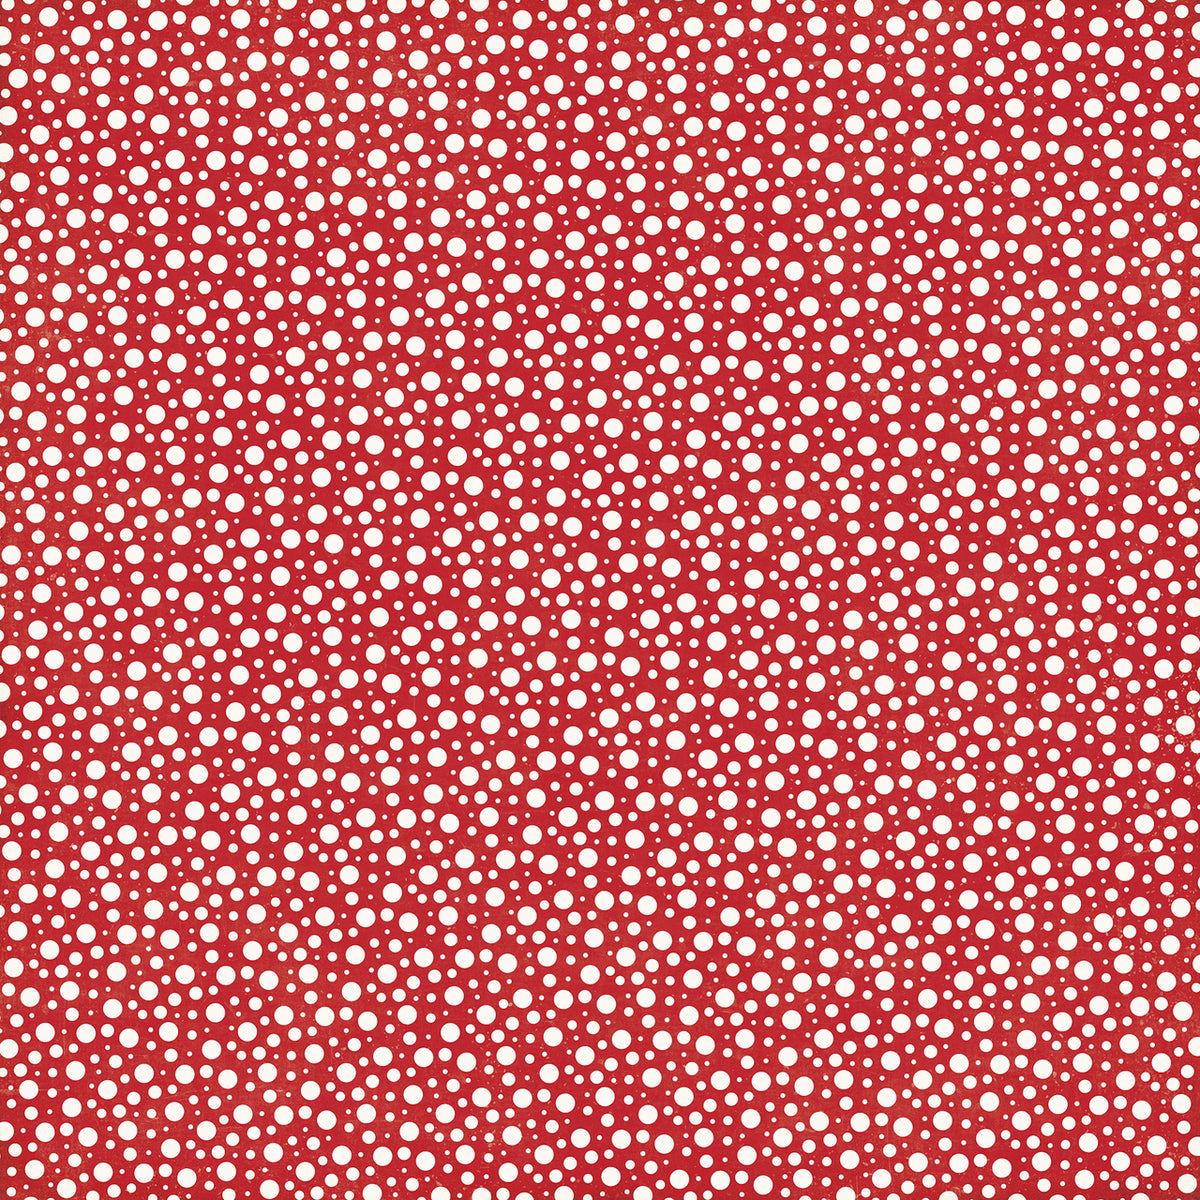 12x12 patterned paper with lots of snowballs on red background - Echo Park Paper